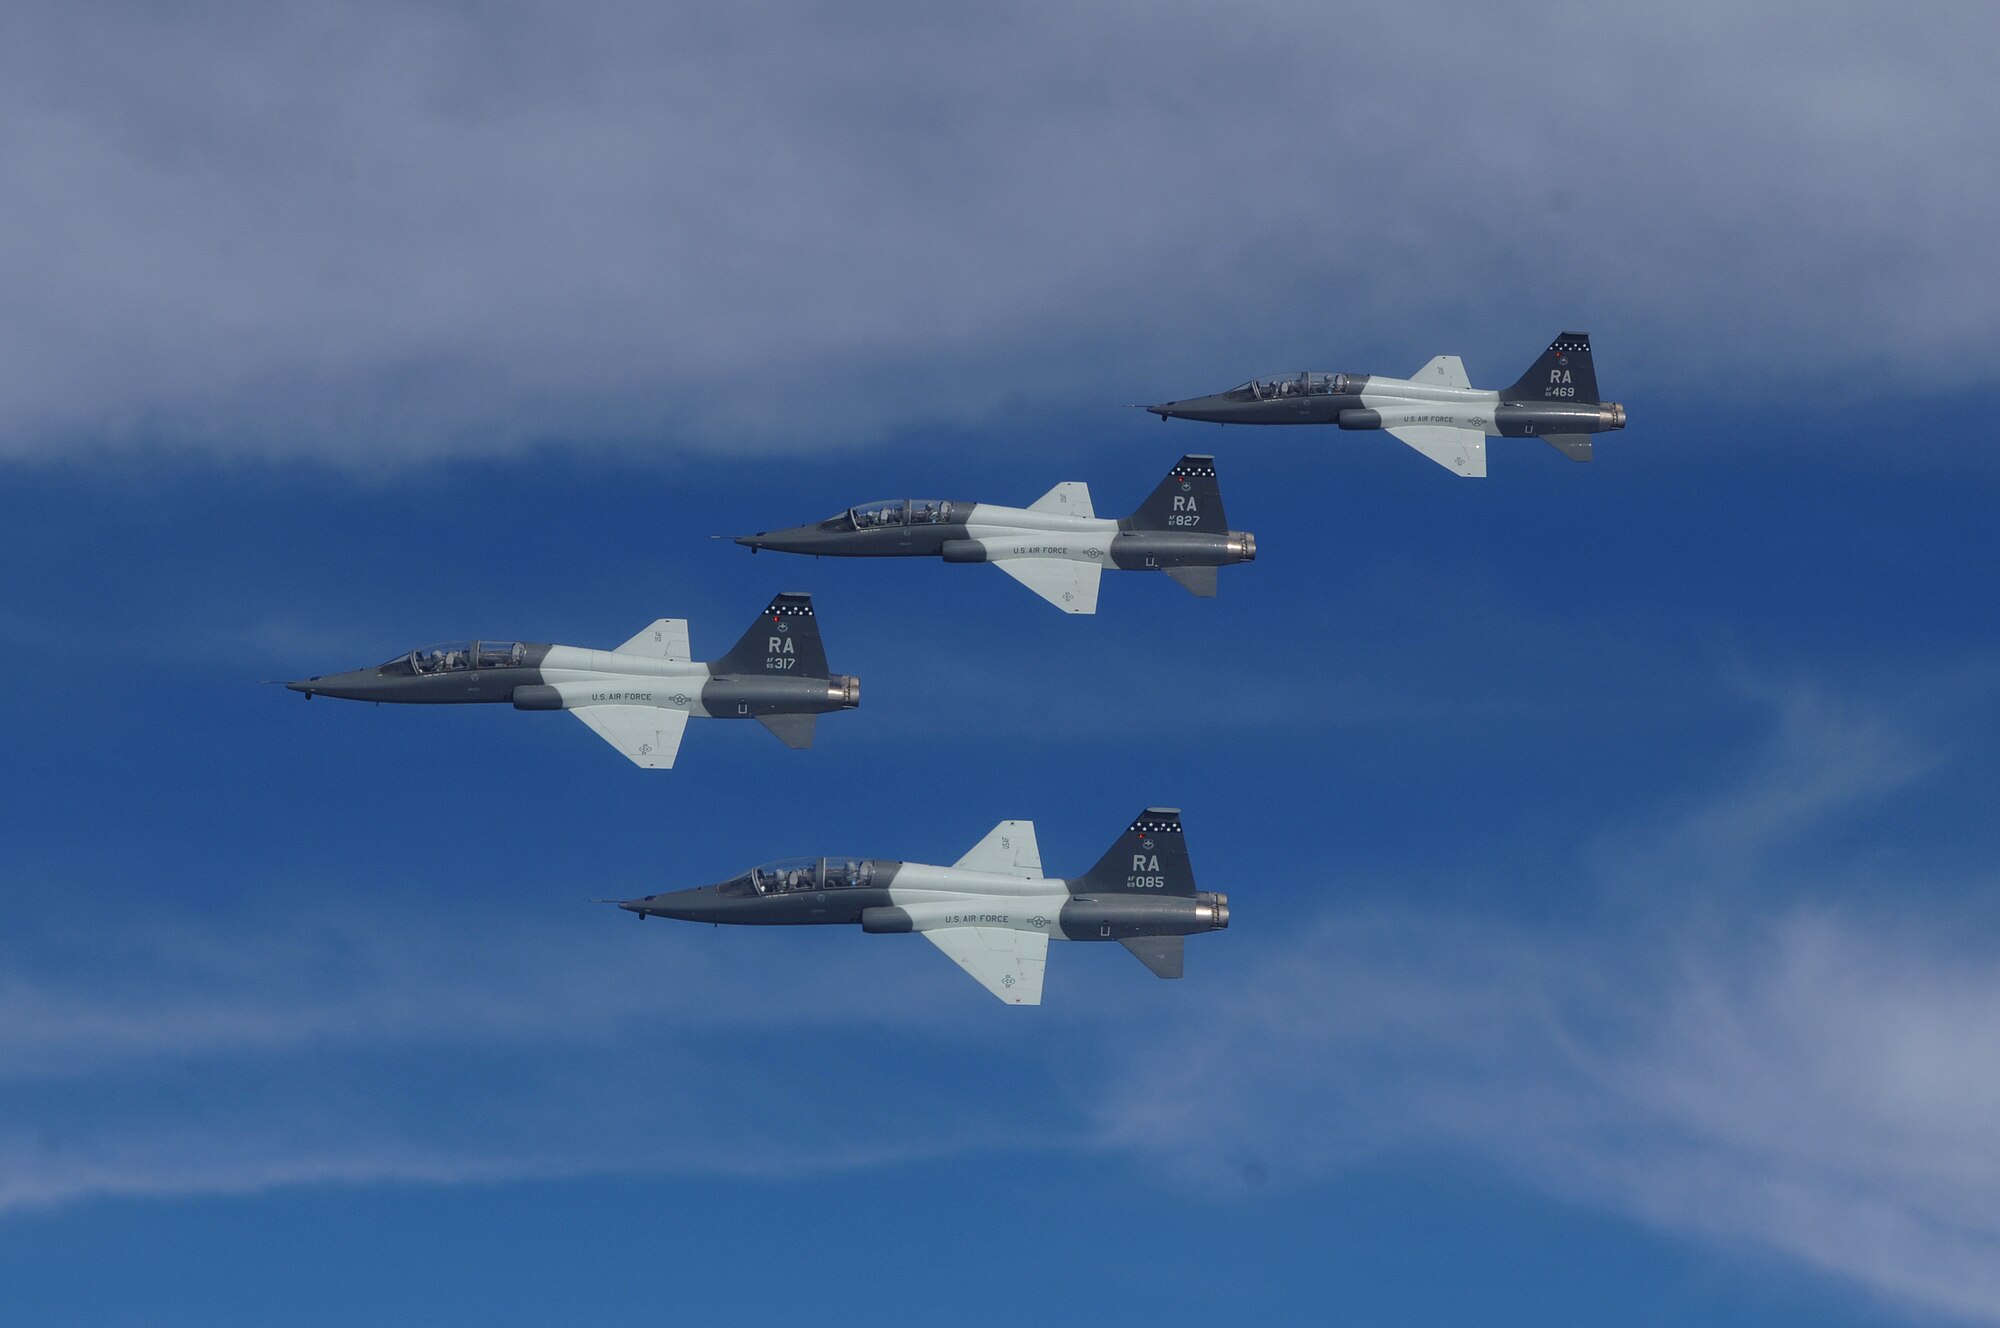 A flight of four T-38s from the 560th Flying Training Squadron, 12th Flying Training Wing, Randolph AFB, Texas fly in formation over Texas, March 27, 2008. Three retired Air Force pilots, who were POWs in Vietnam, flew back seat during the mission as part of Randolph's POW Ceremonies. US Air Force Photo by Master Sgt. Scott Reed